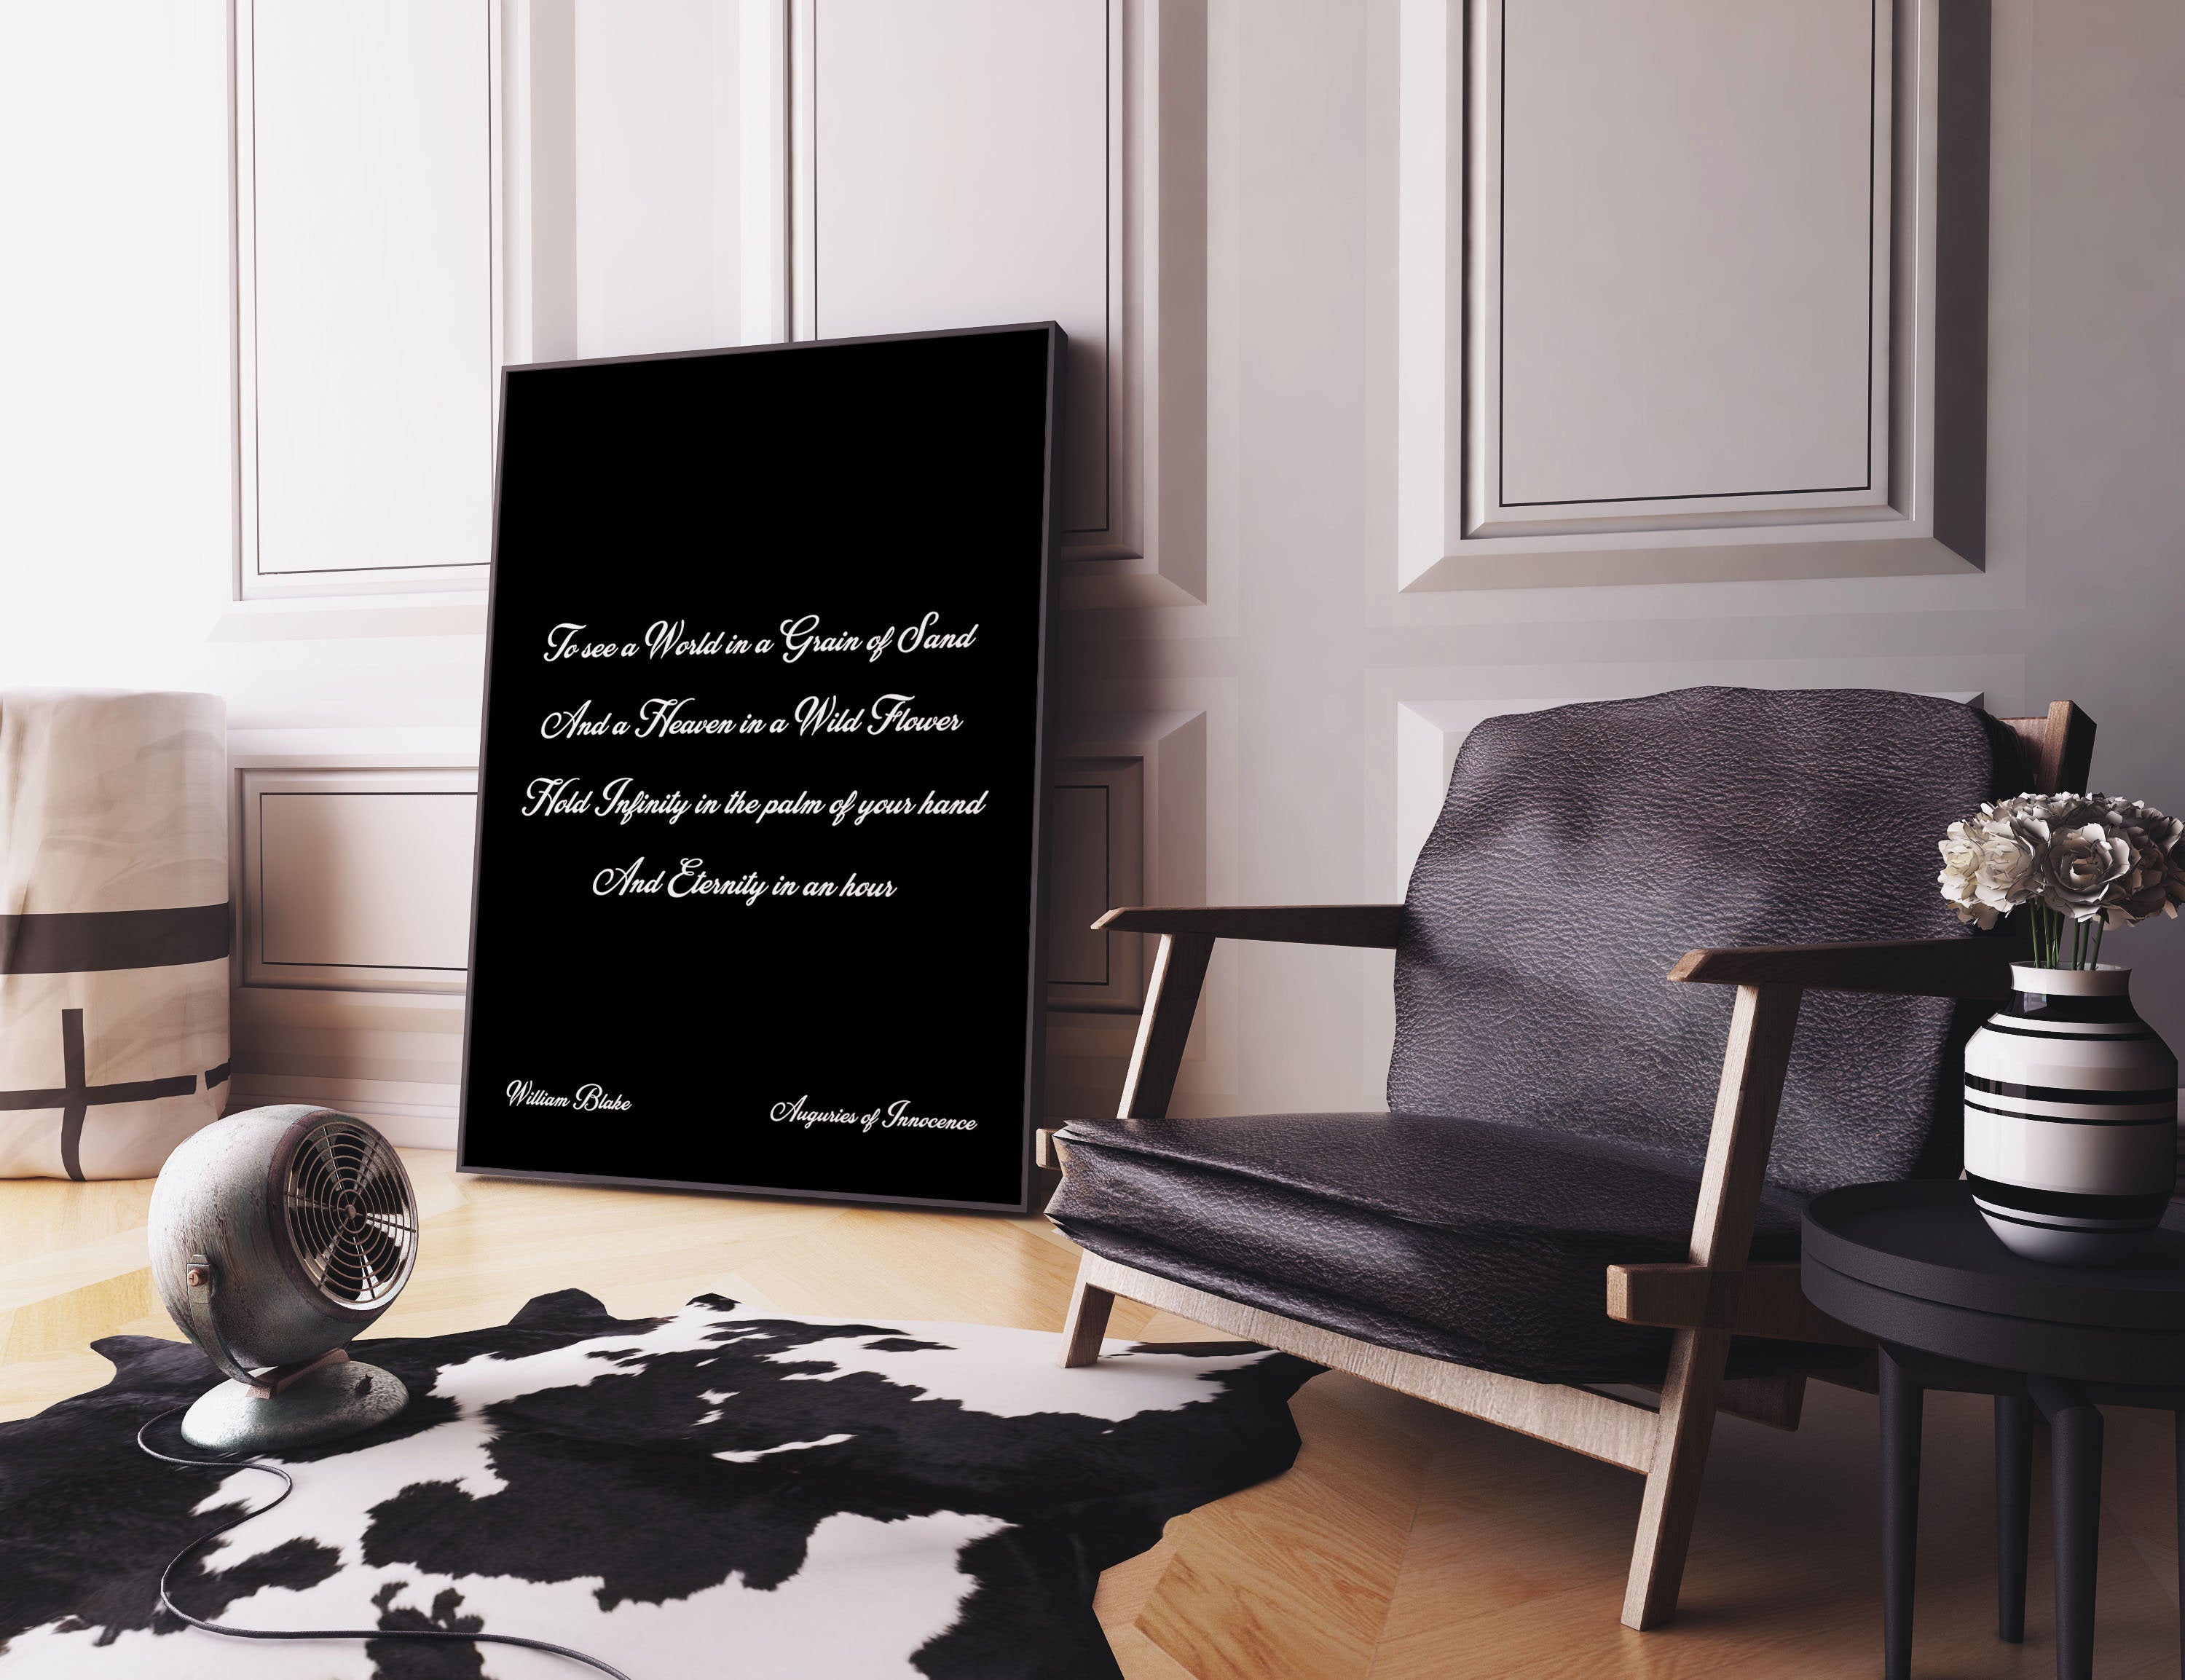 William Blake See The World in a Grain of Sand Poem Print, Inspirational Quote in Black & White for Home Wall Decor, Unframed - BookQuoteDecor